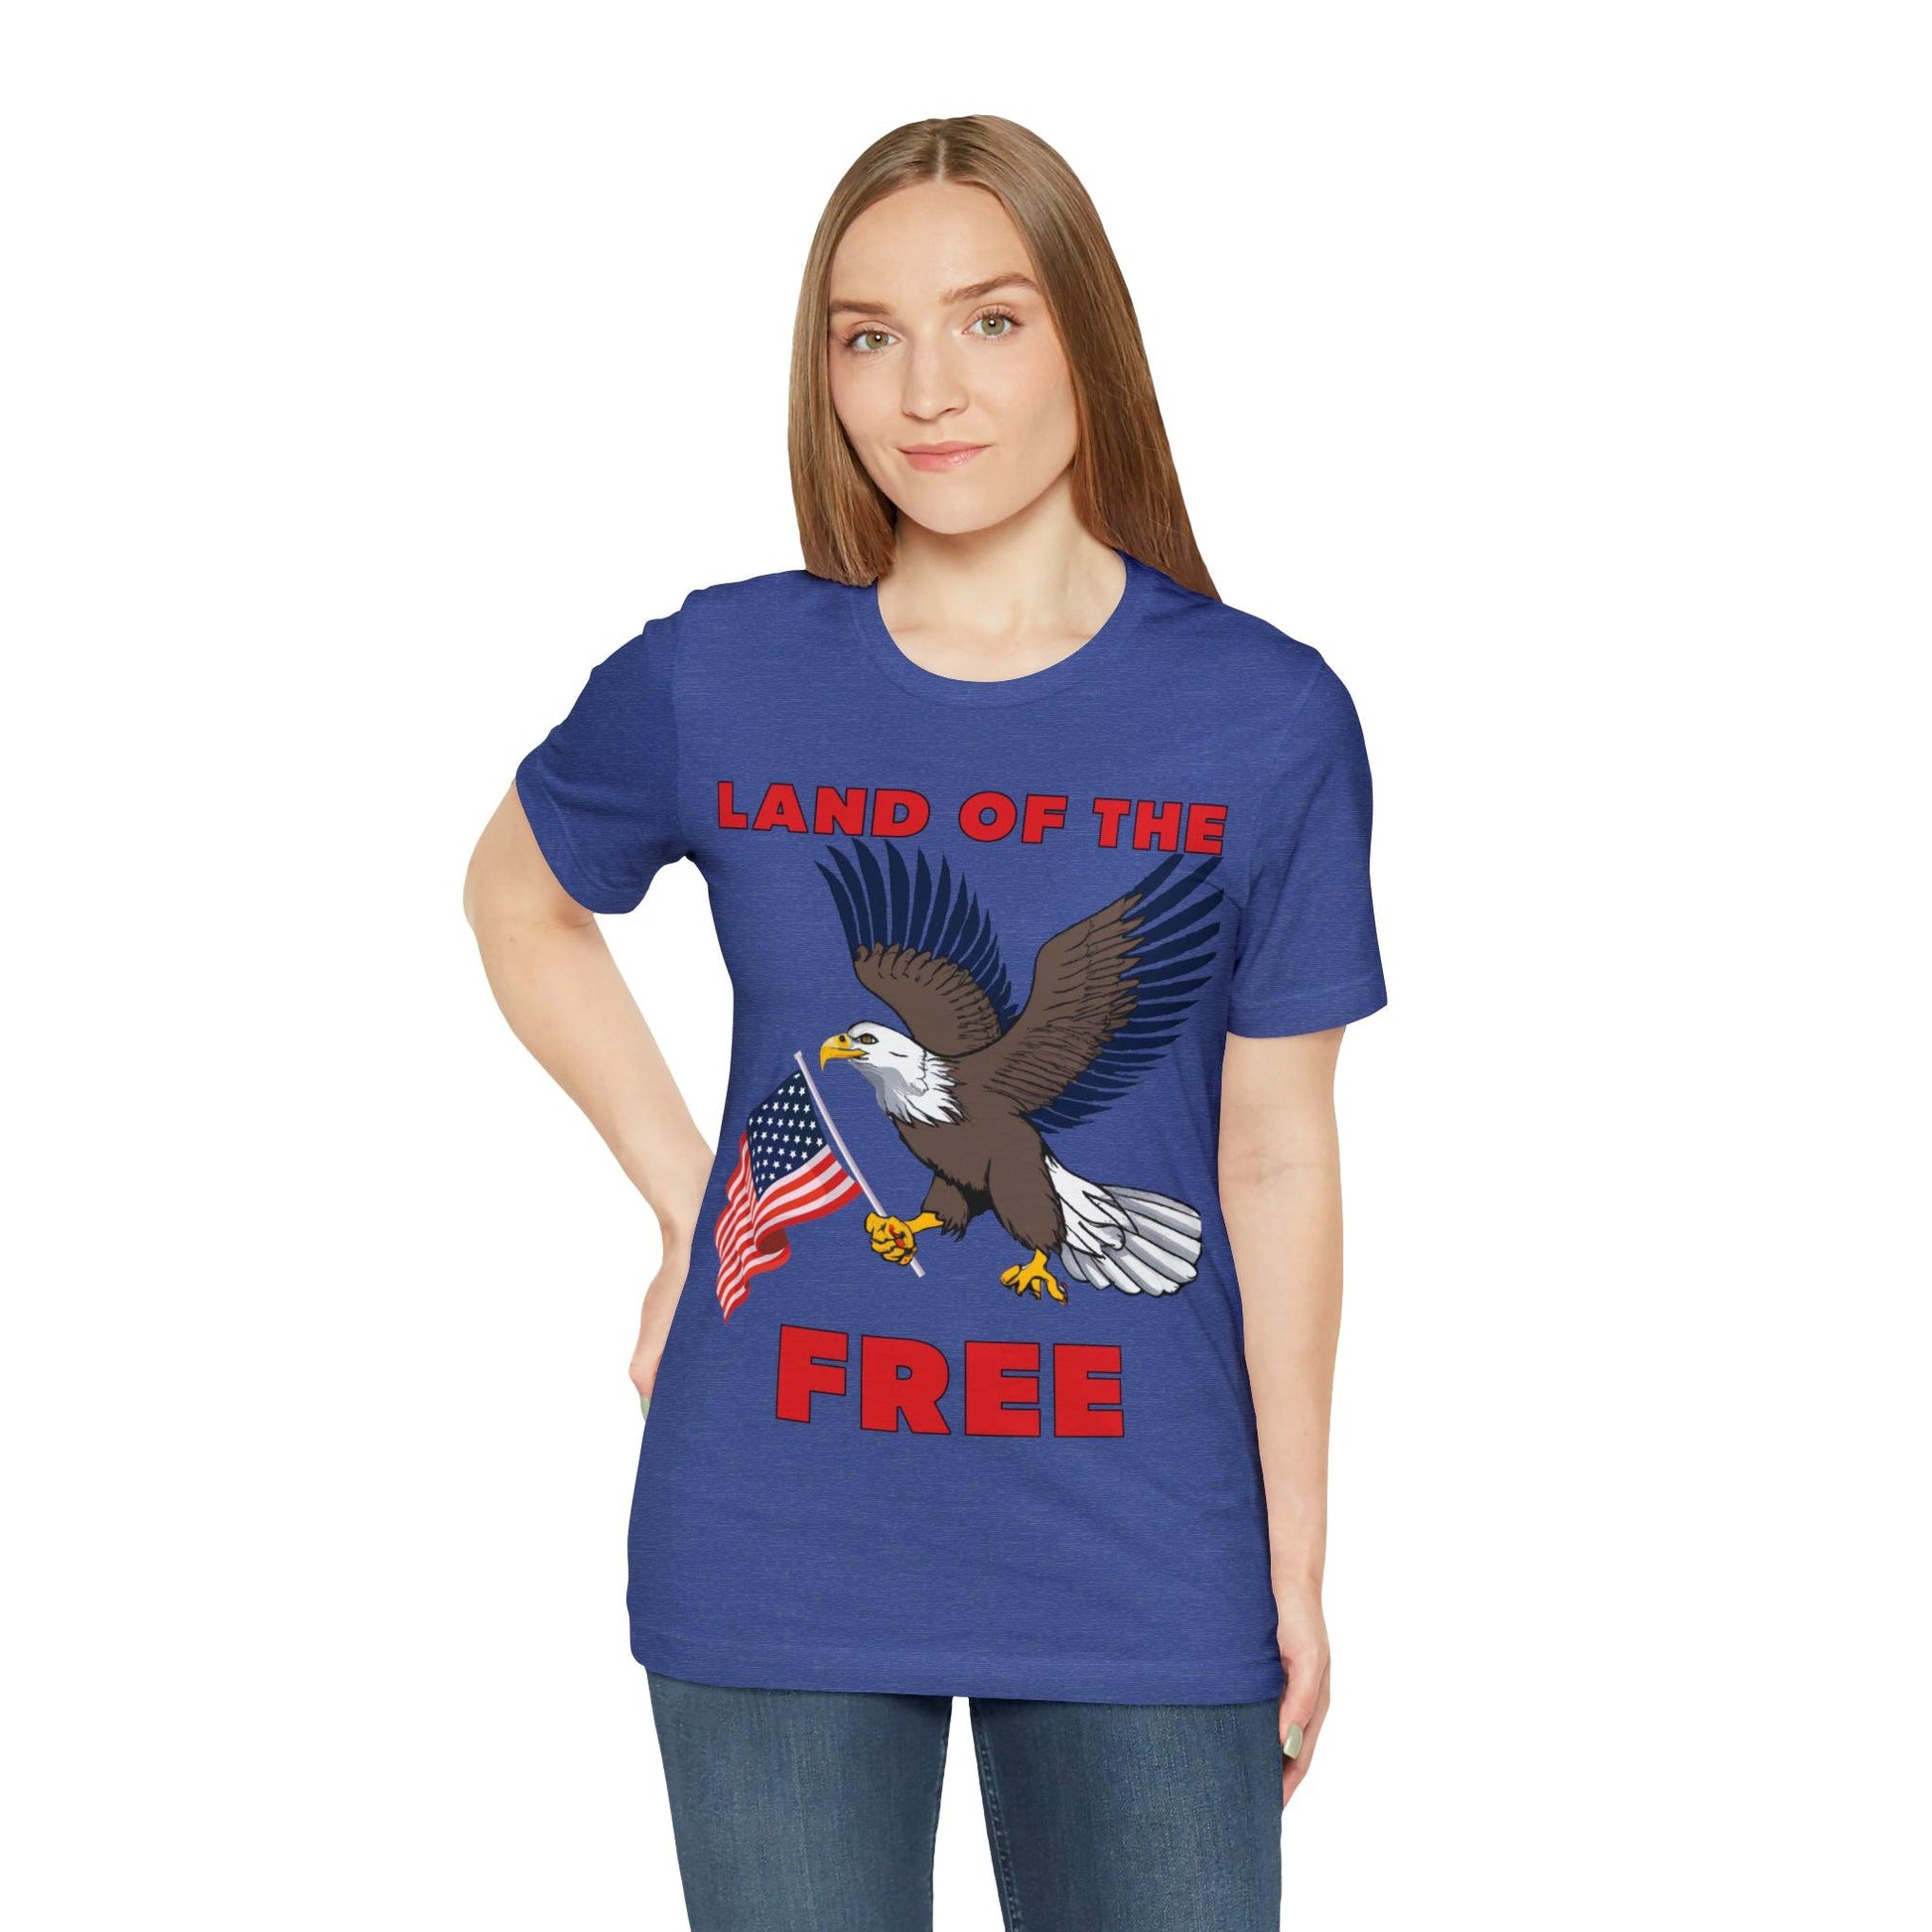 Land of the Free: Celebrate Independence Day with Patriotic Shirts, Flag shirt - Freedom, Fireworks, and More - Giftsmojo